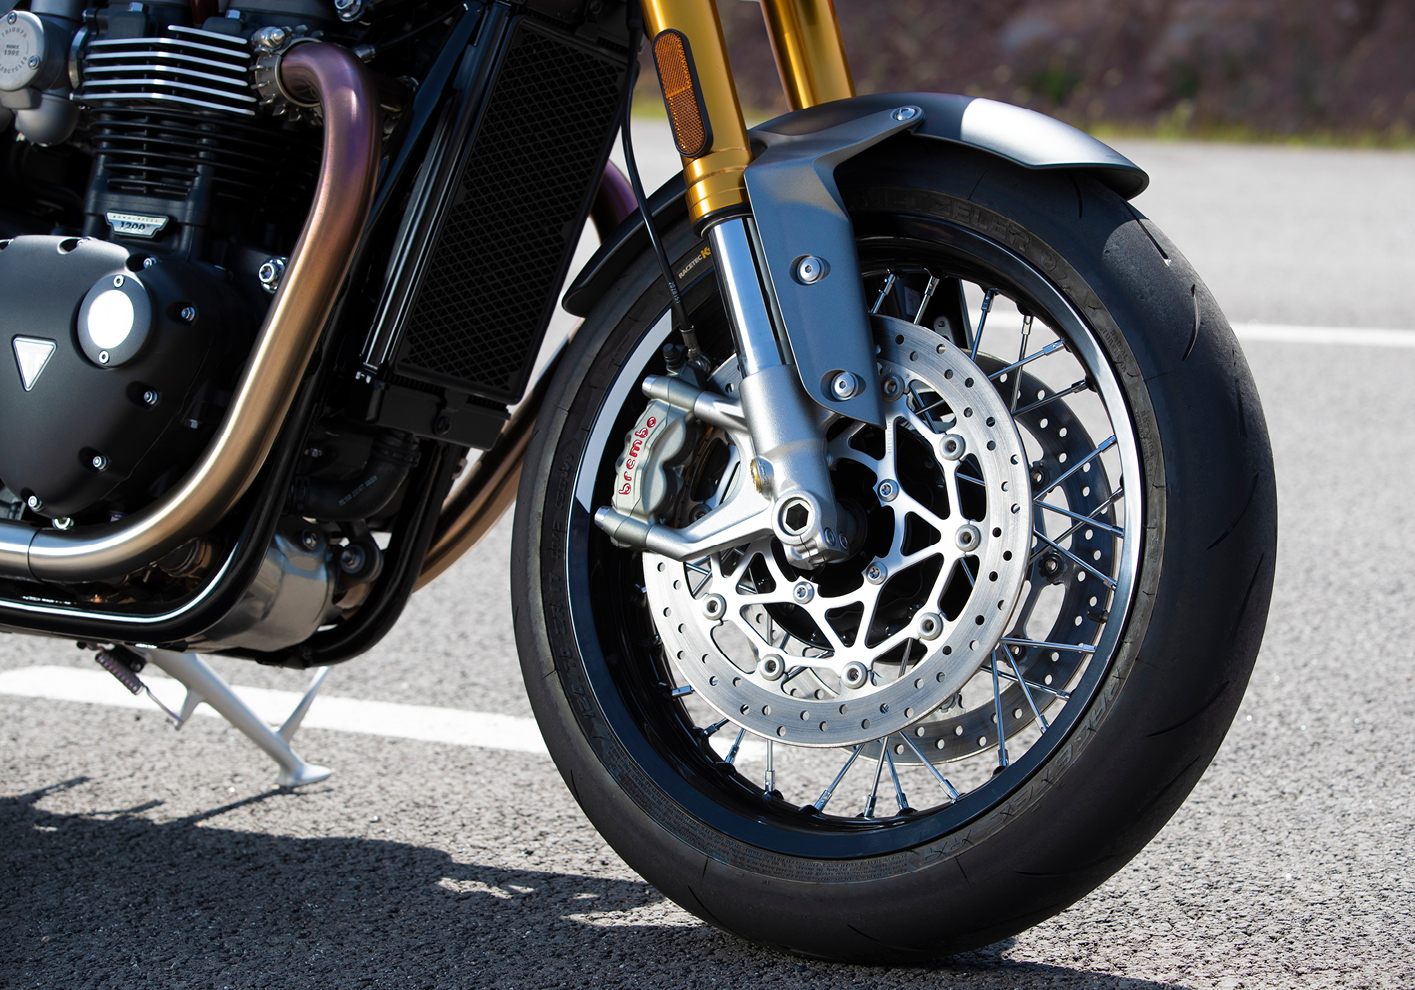 Front wheel and Brembo brakes on the Triumph Thruxton RS motorcycle